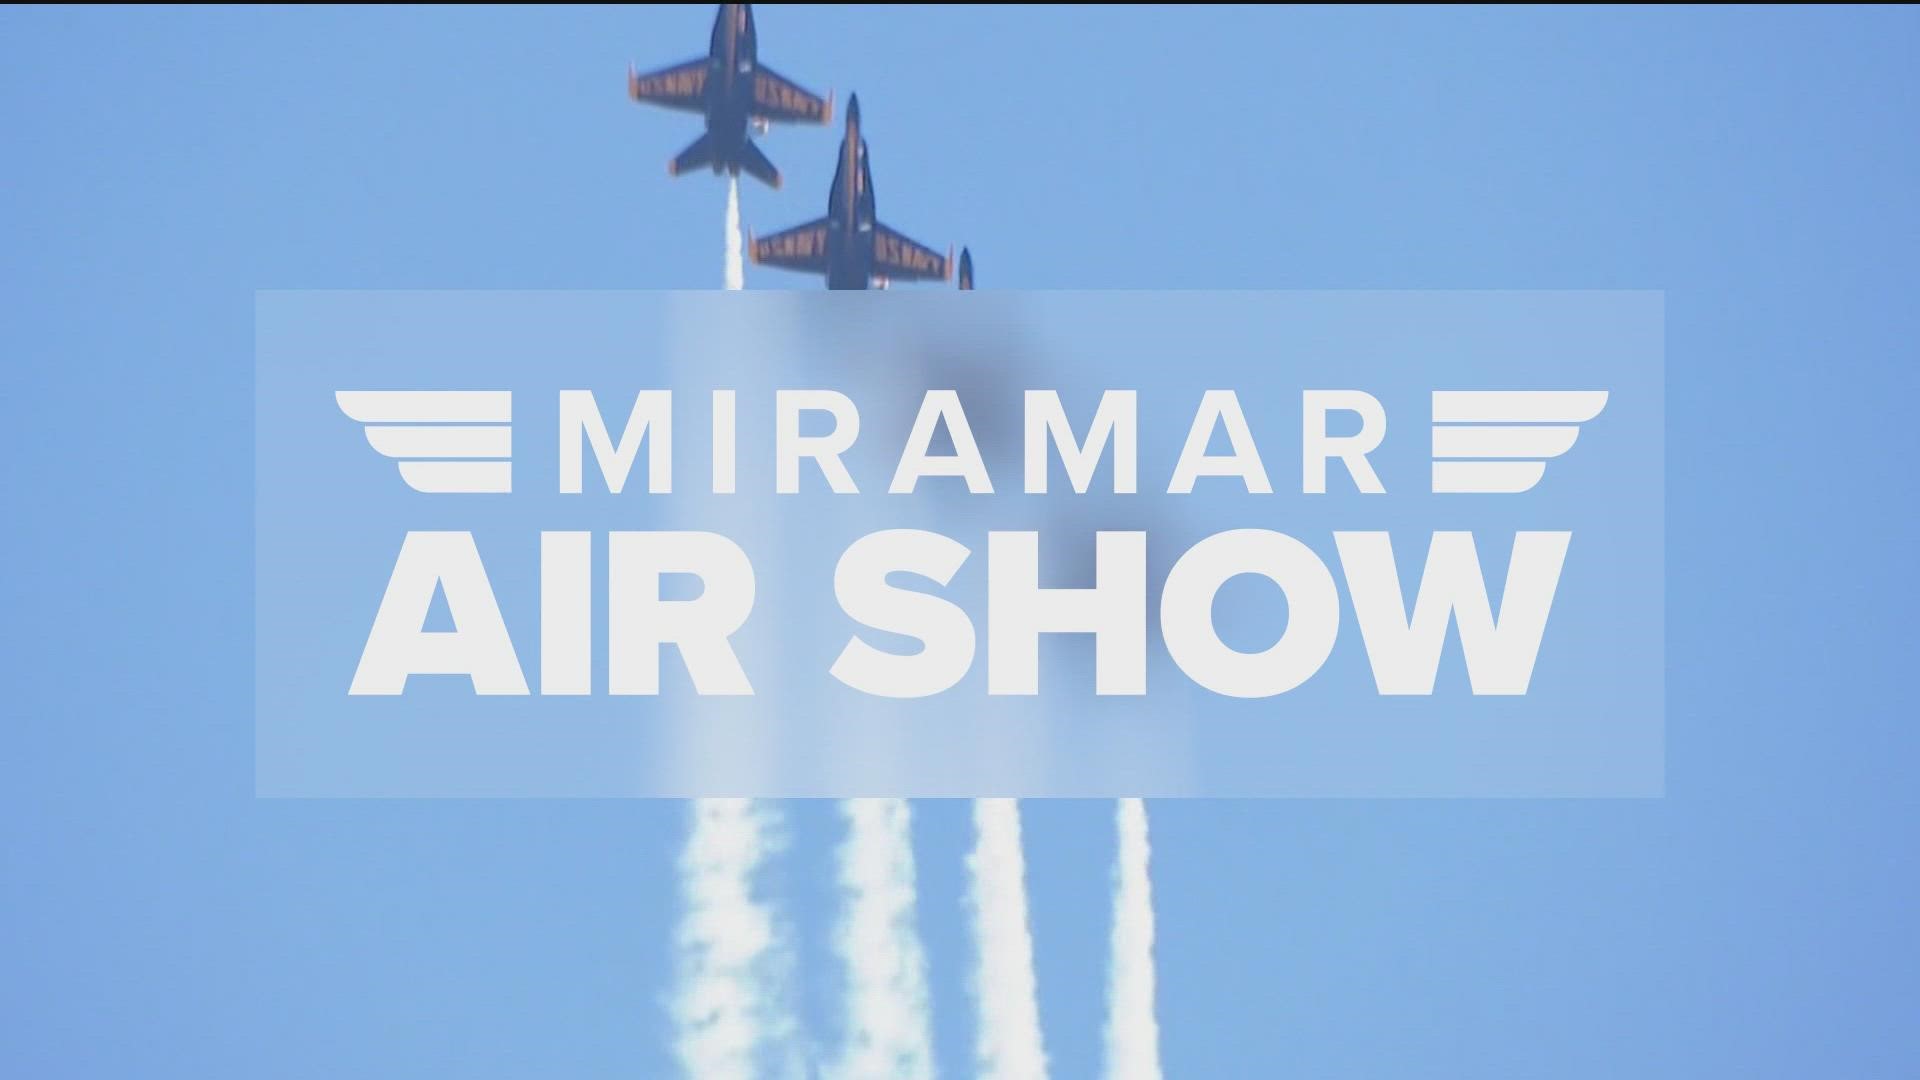 The largest military air show returns to San Diego in 2023 at MCAS Miramar with immersive experiences, static displays, and daytime shows.